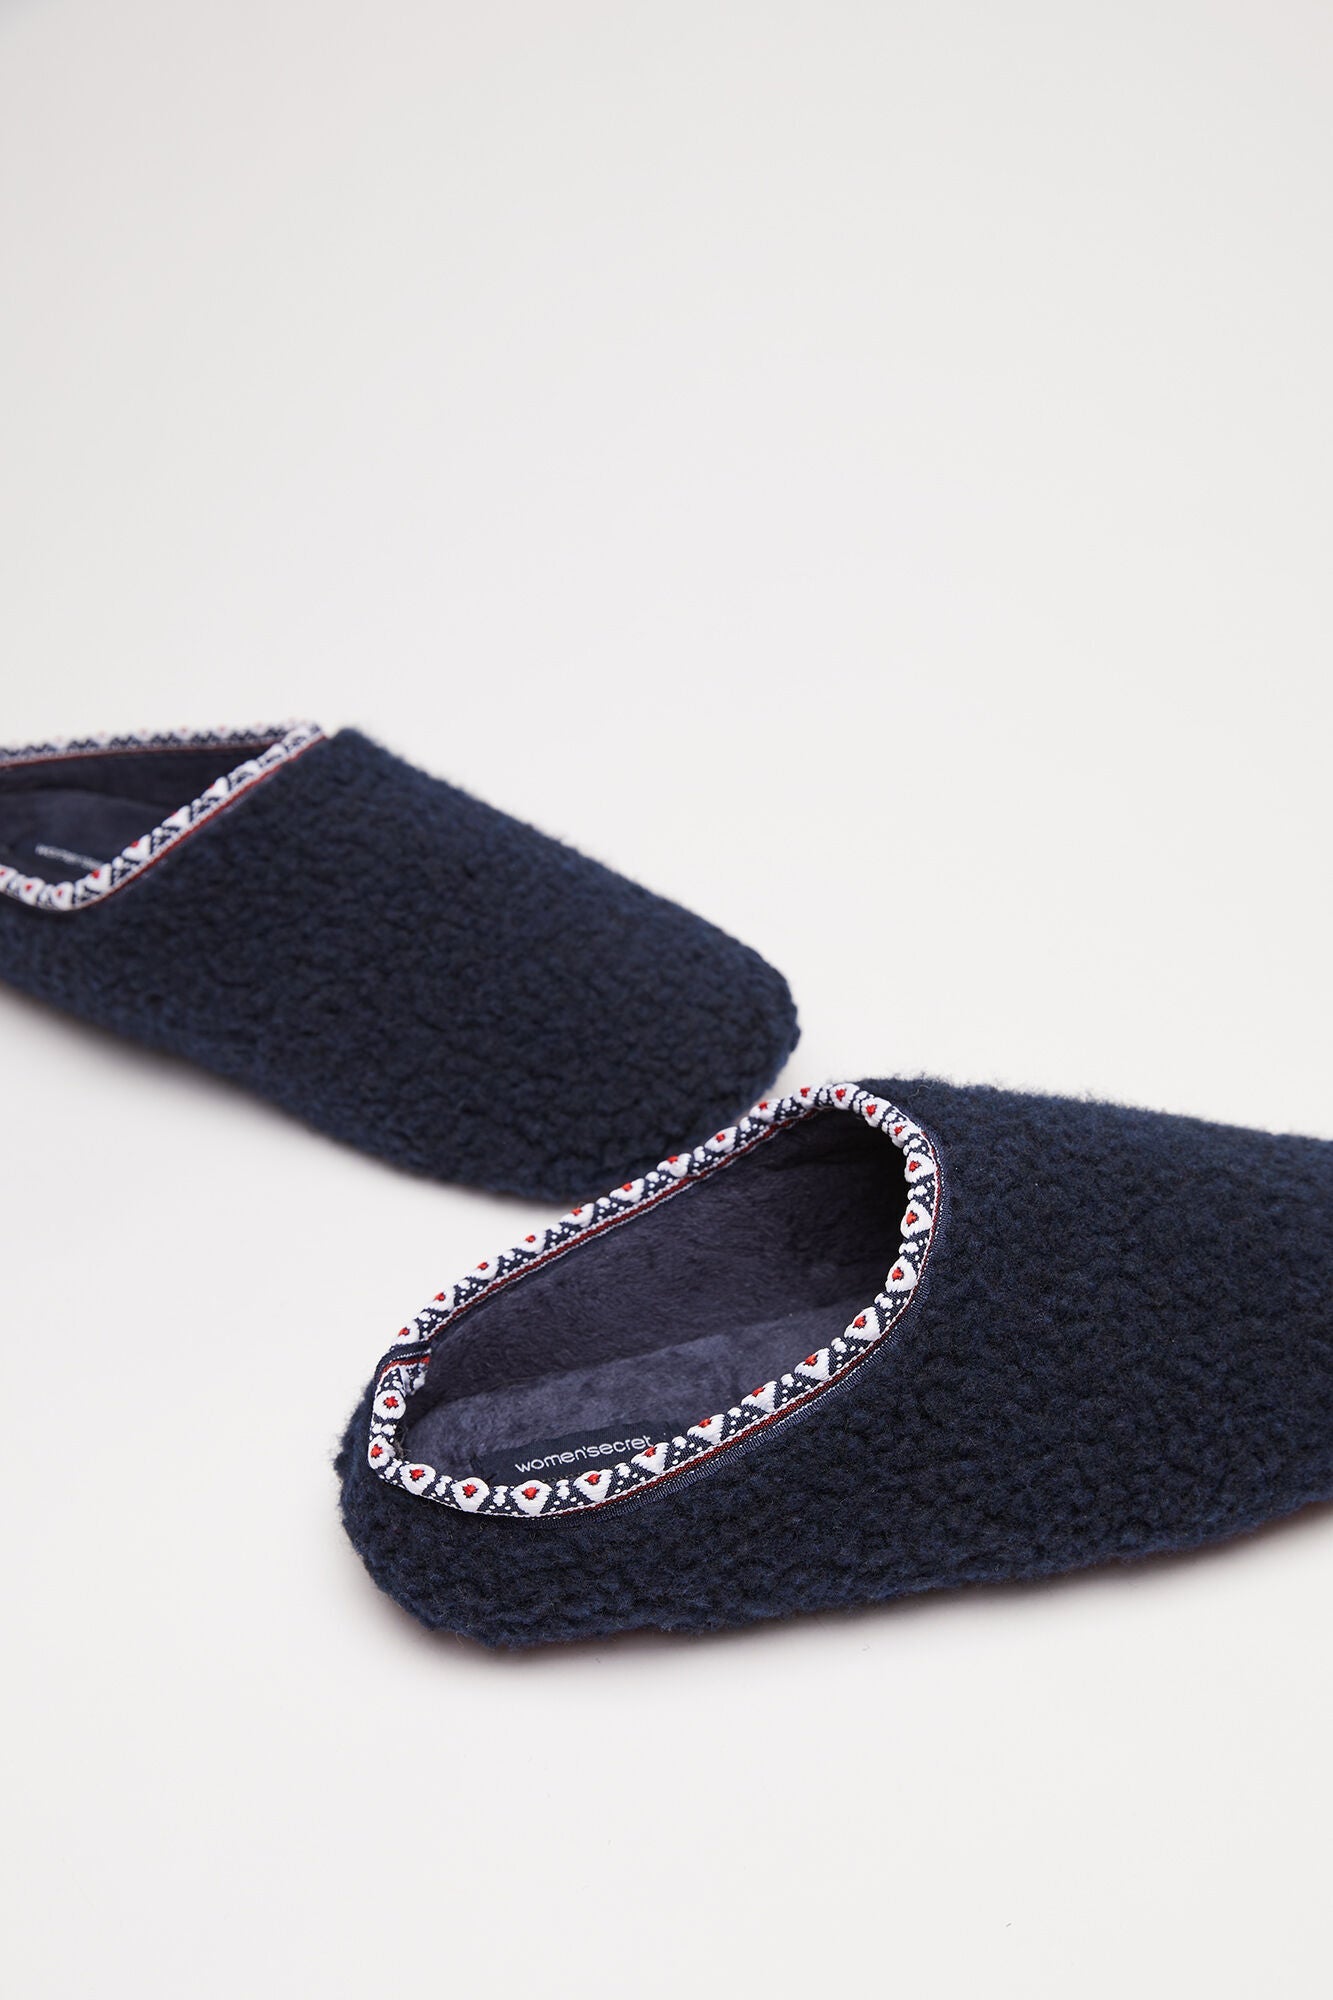 Winter Nomad Slippers